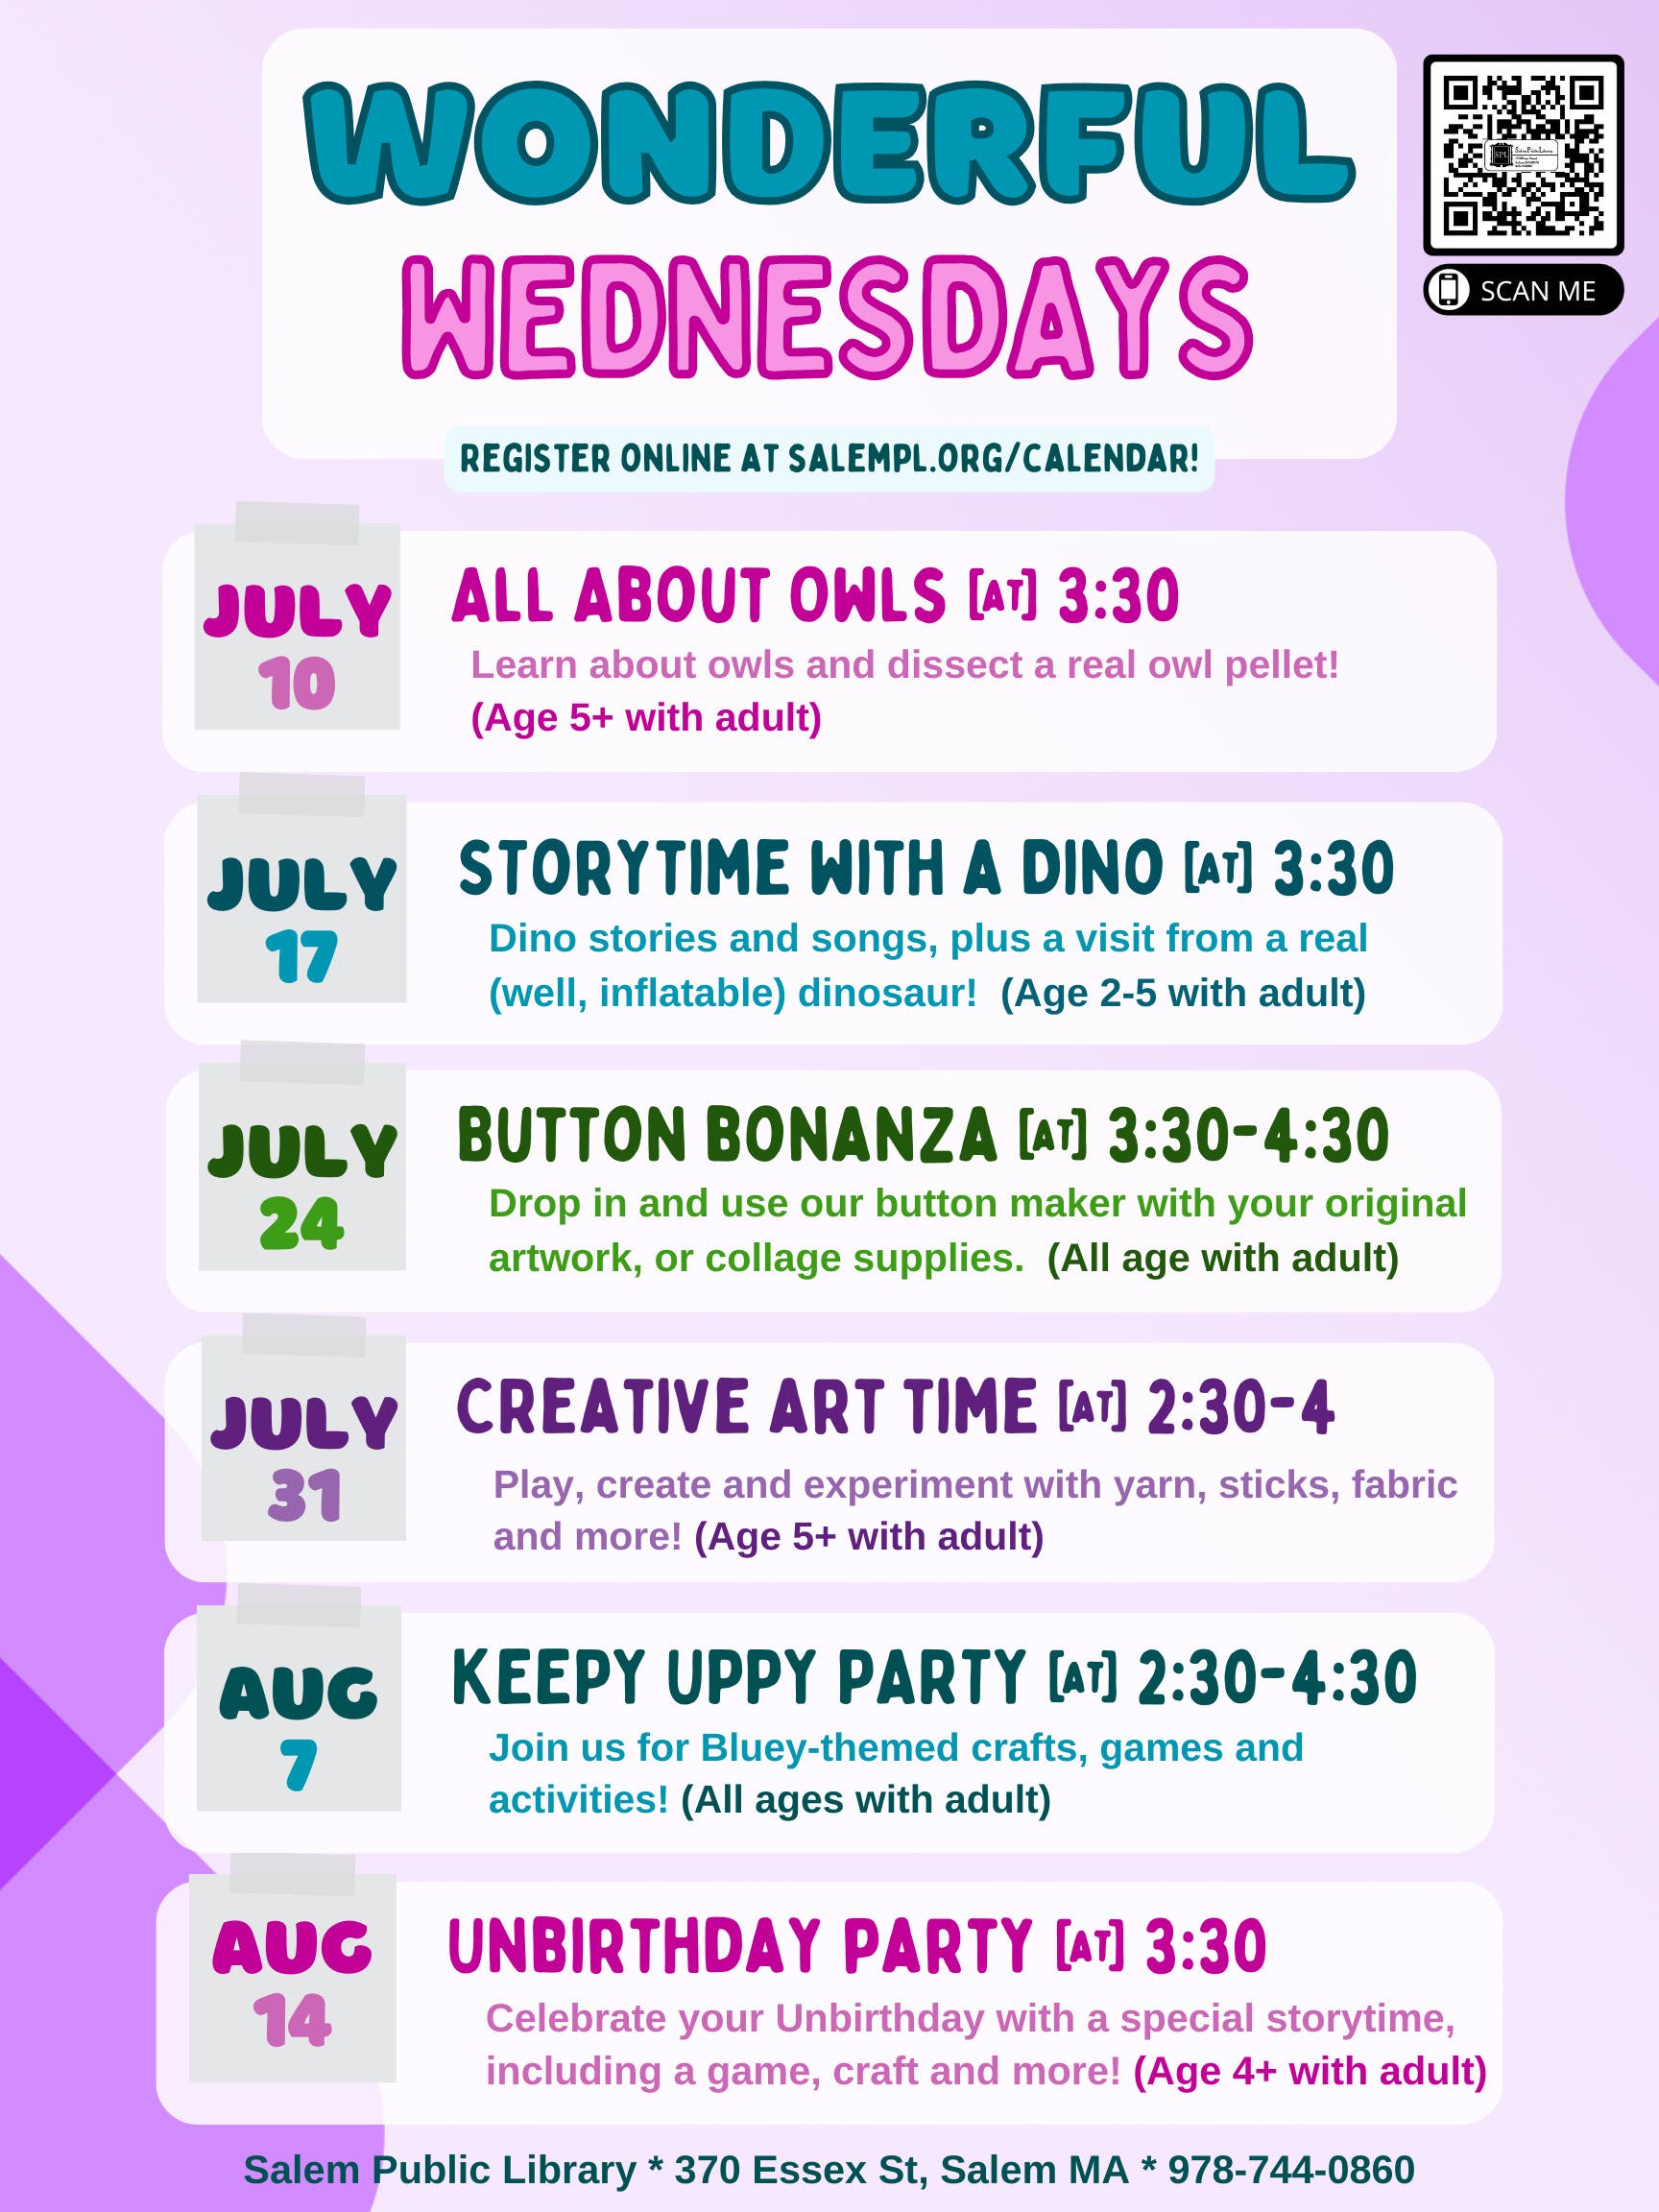 Wonderful Wednesdays: All About Owls for kids ages 5 and up